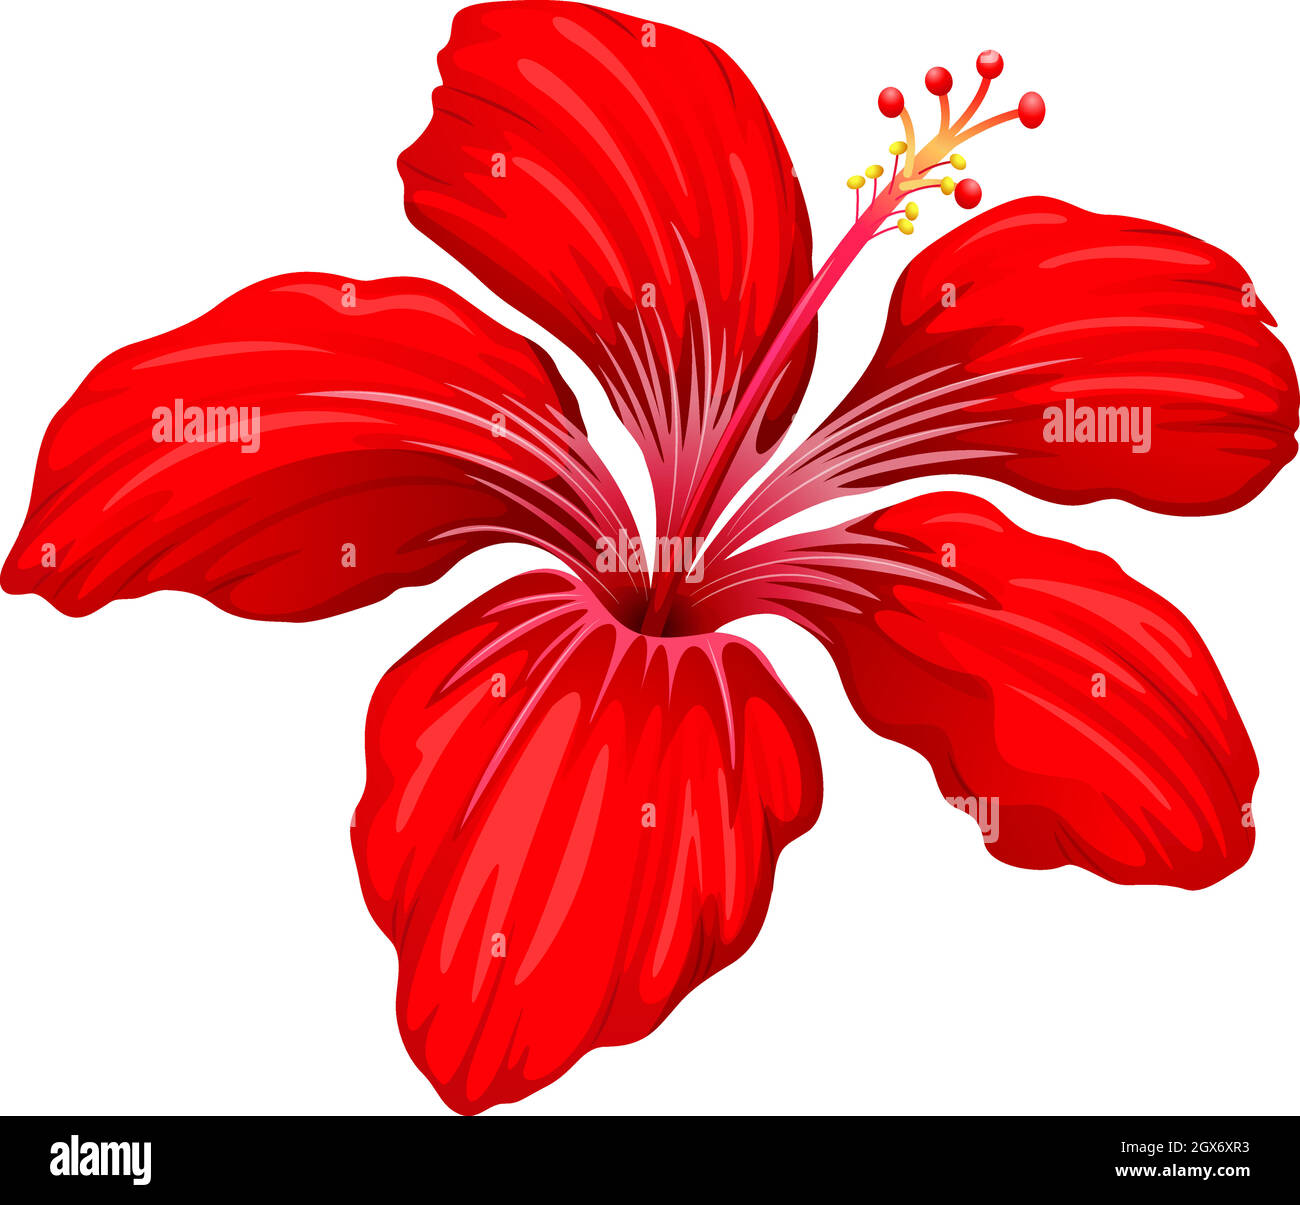 A red hibiscus plant Stock Vector